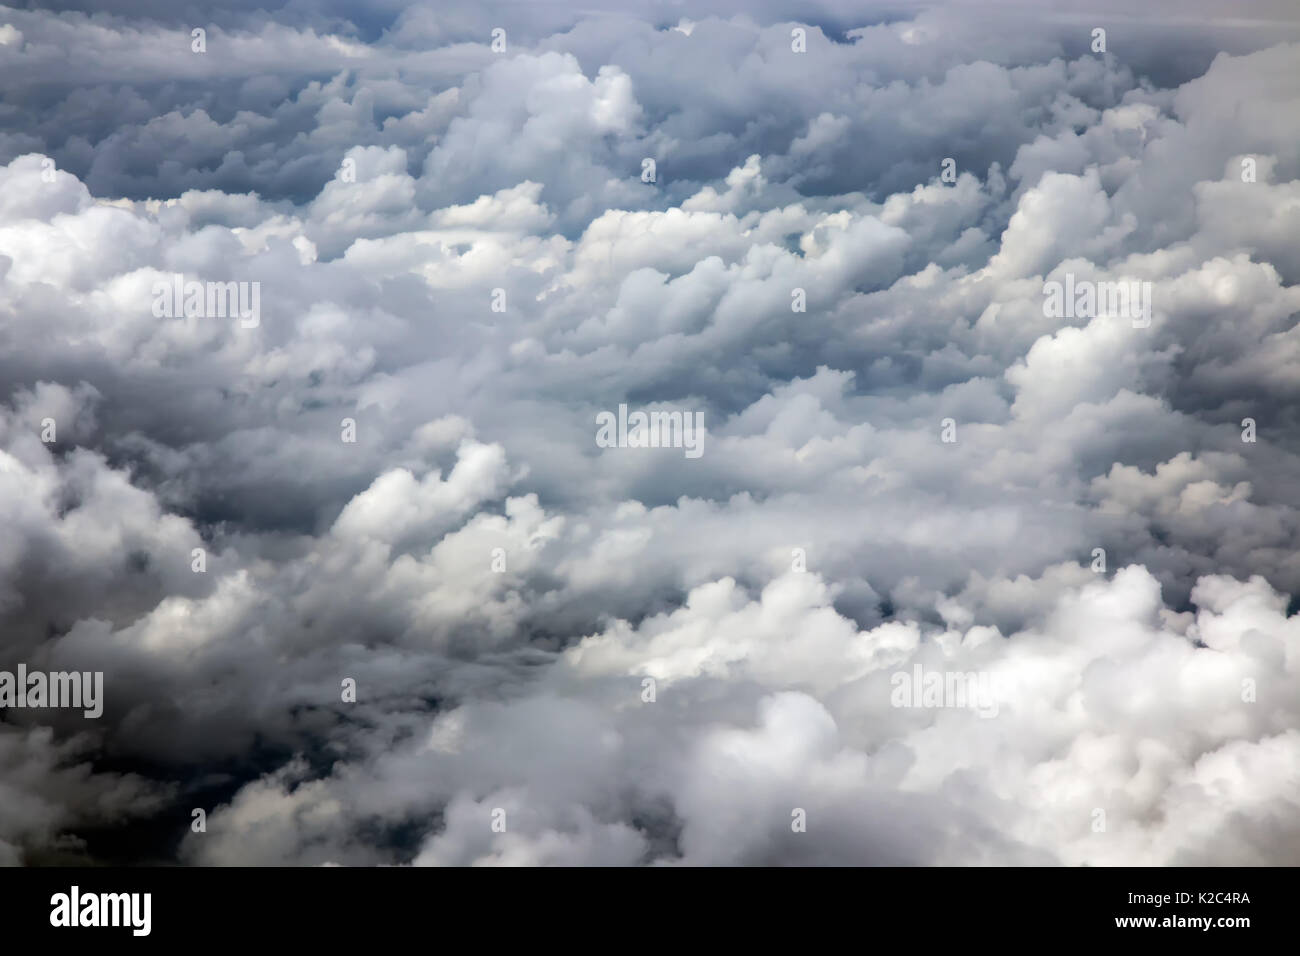 The dramatic sky with clouds made from a window of an airplane. Stock Photo